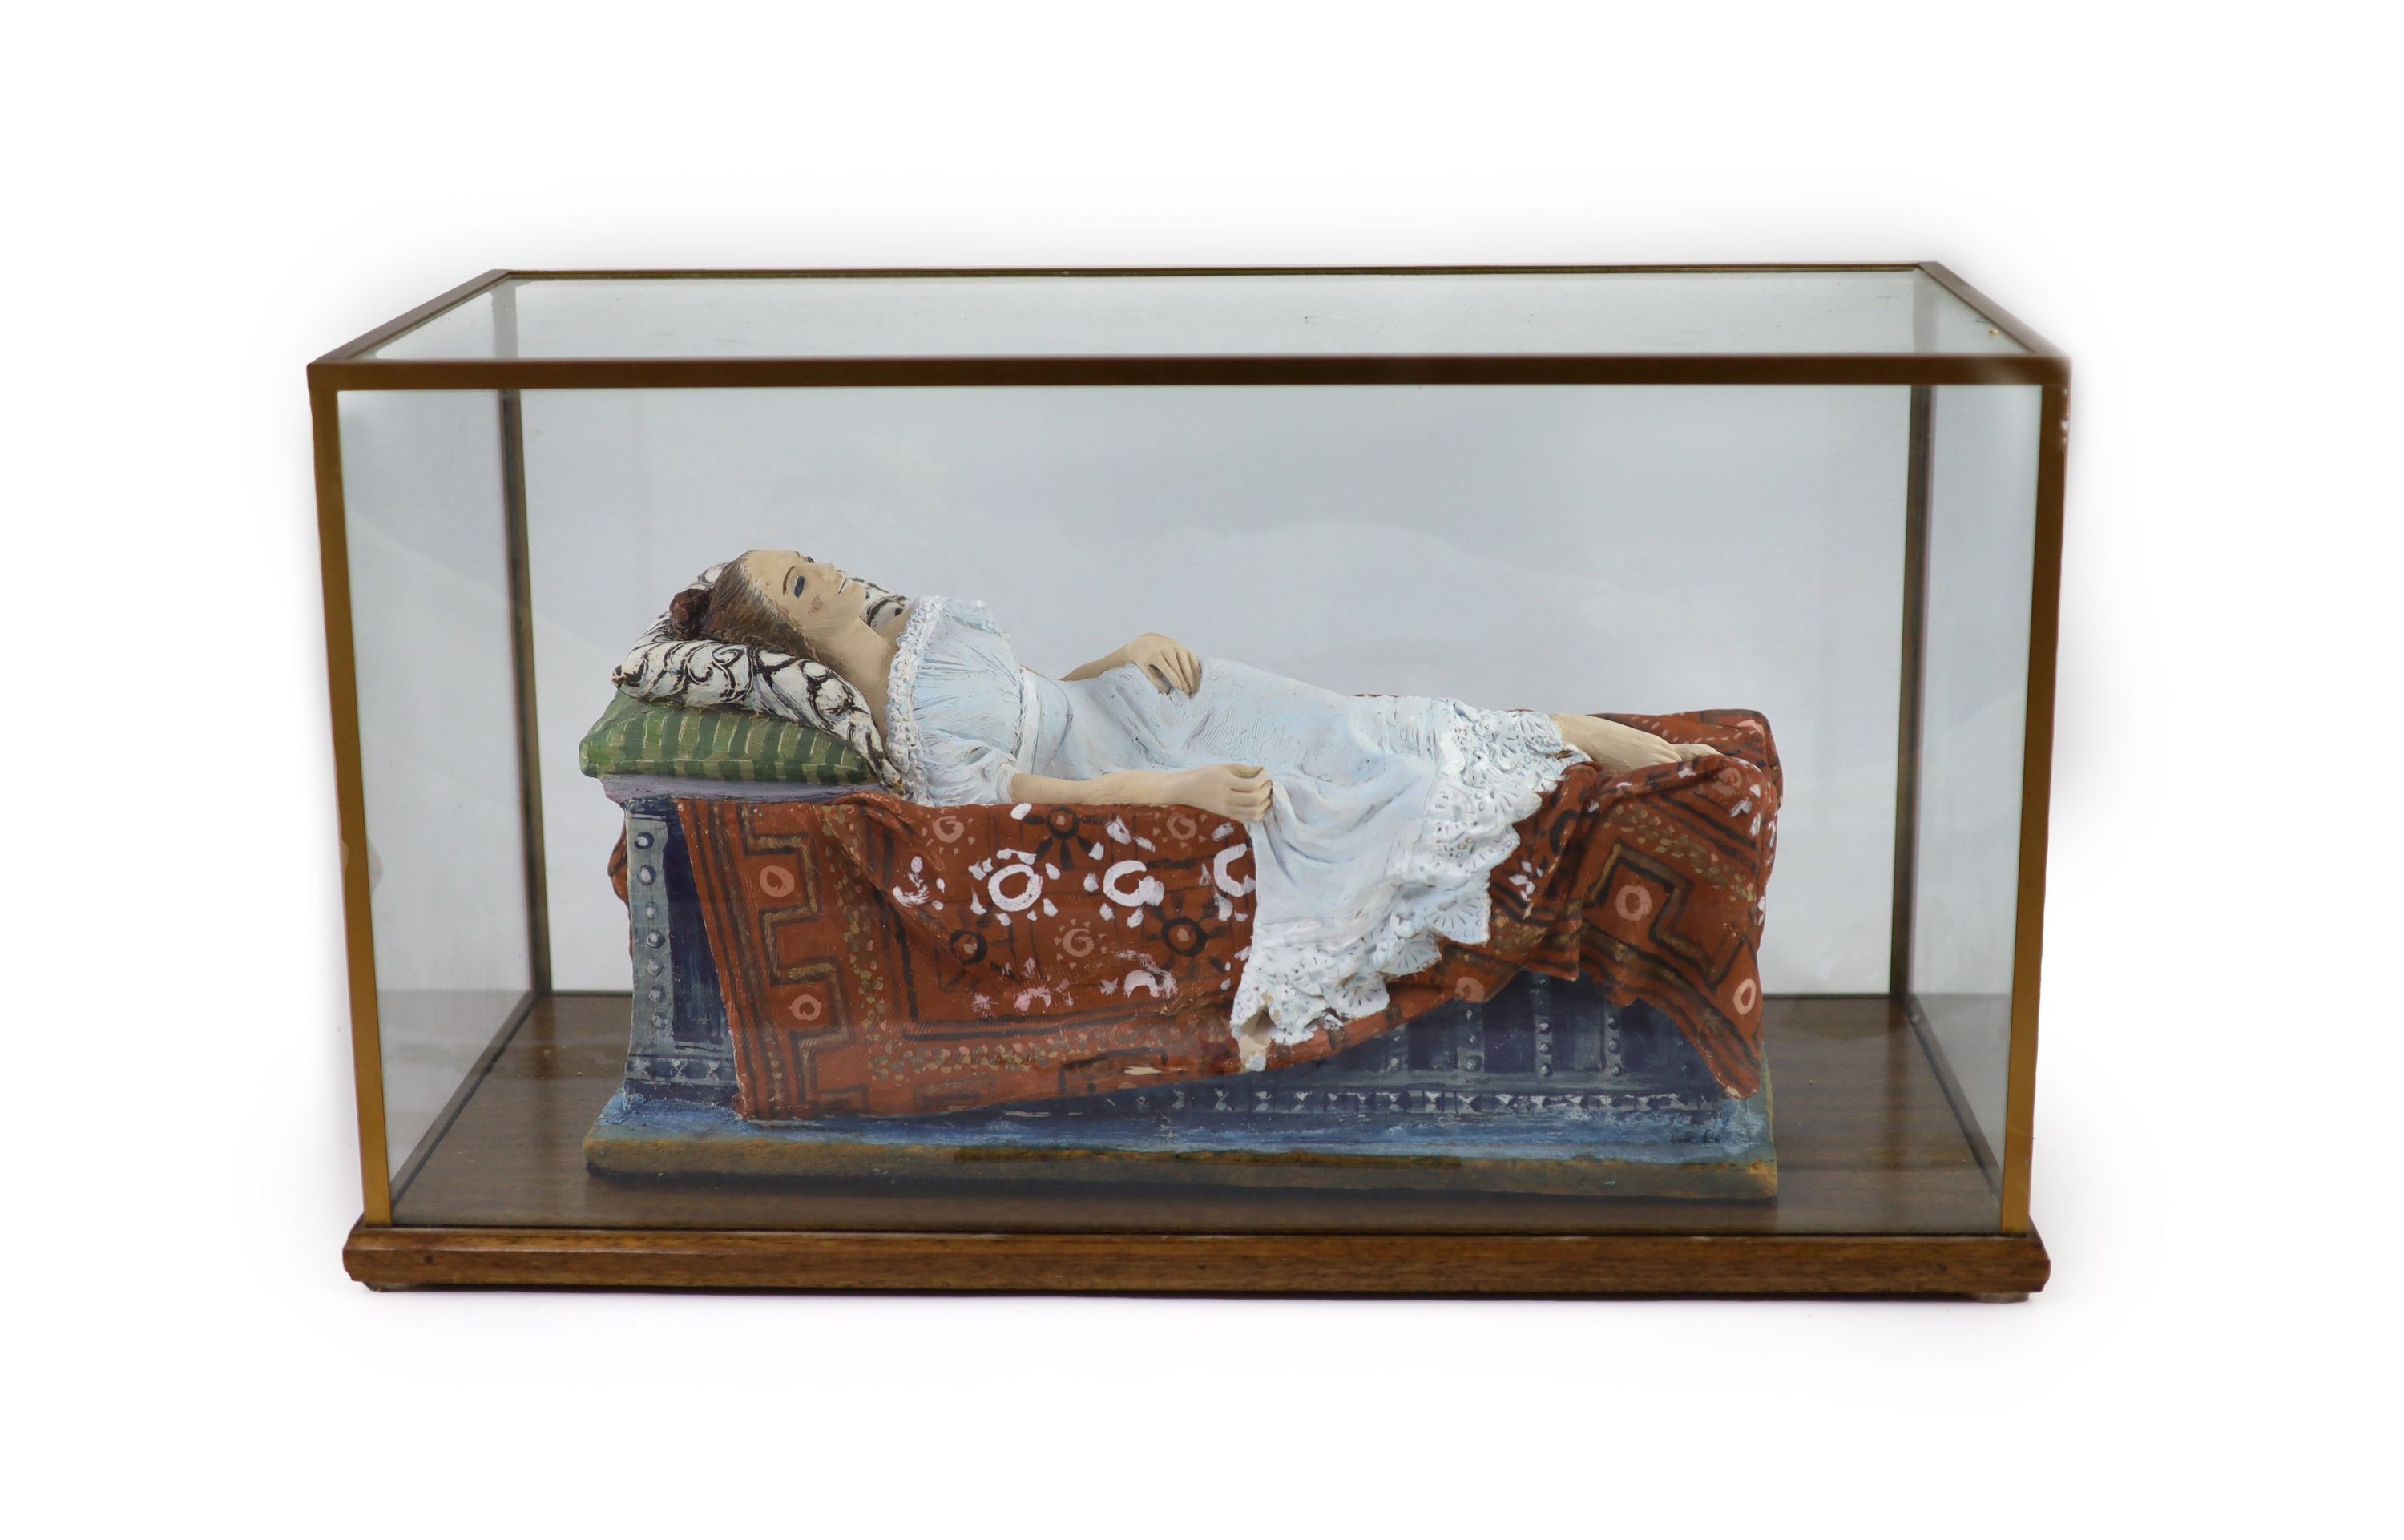 Quentin Bell (1910-1996), painted terracotta figure 'Sleeping Beauty', 45.5 cm long, 23 cm high, 19.5 cm wide, Housed in a glazed case